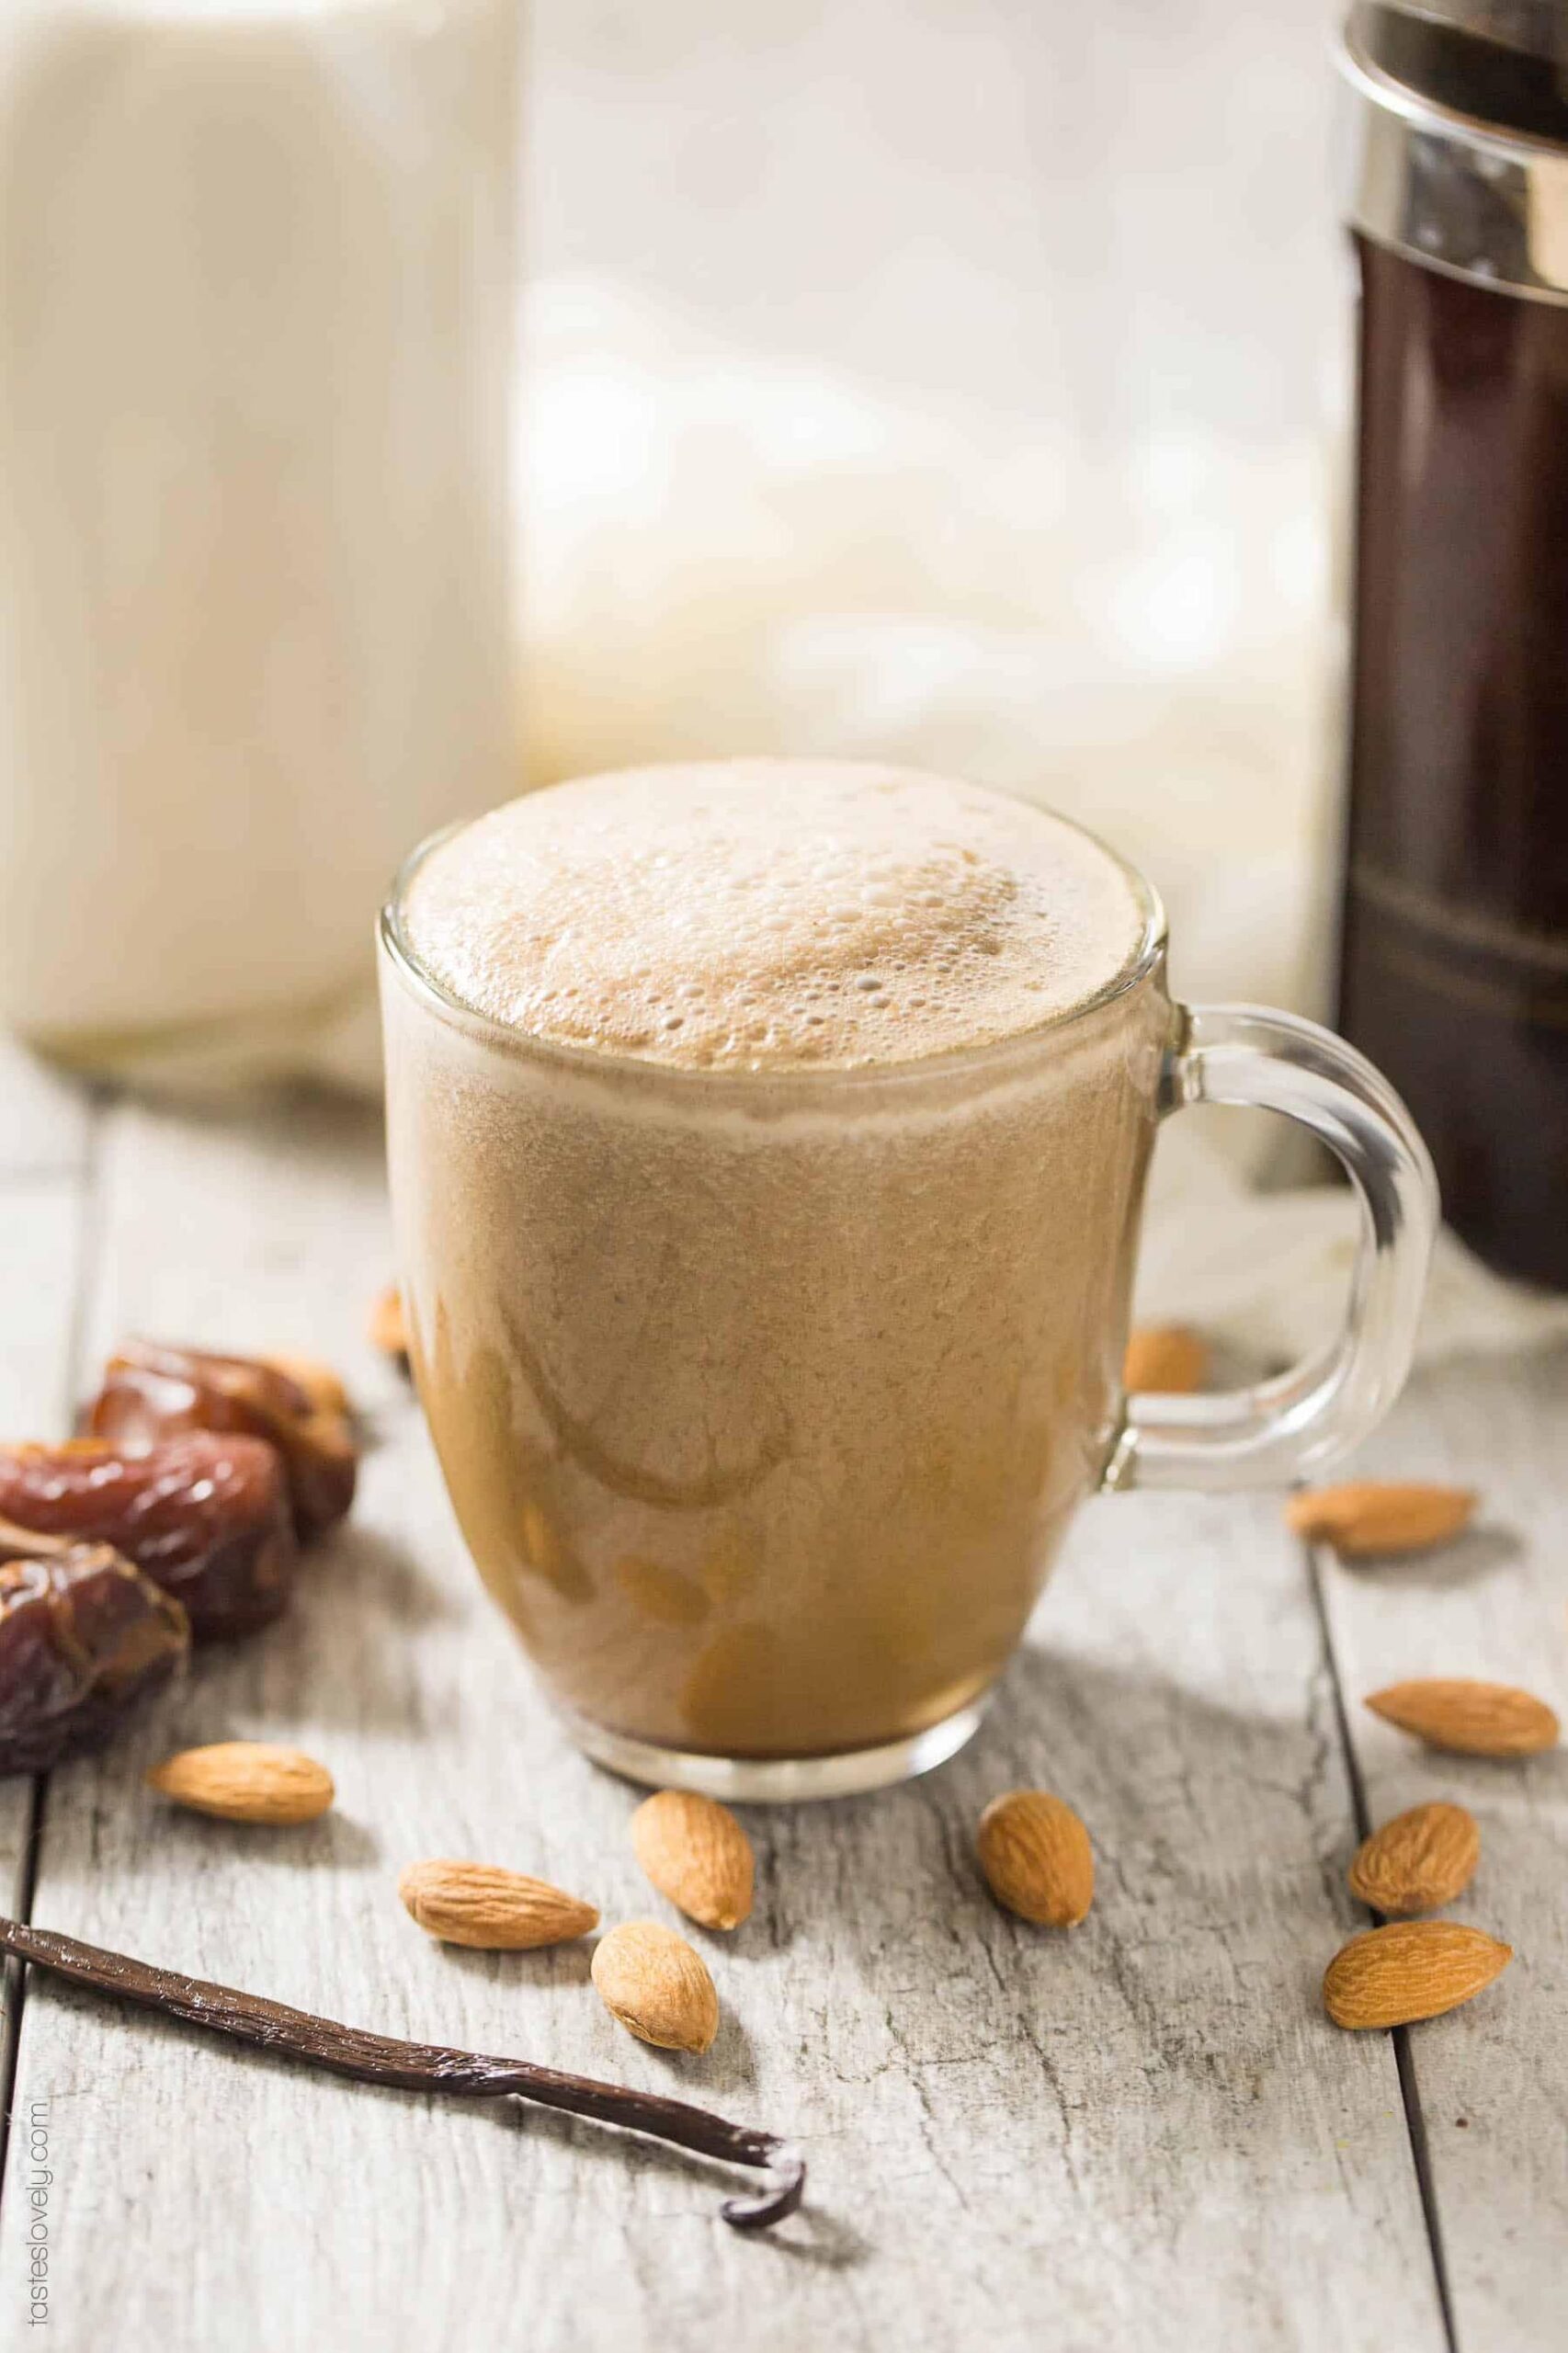  Discover a new favorite coffee drink that's both vegan and delicious!